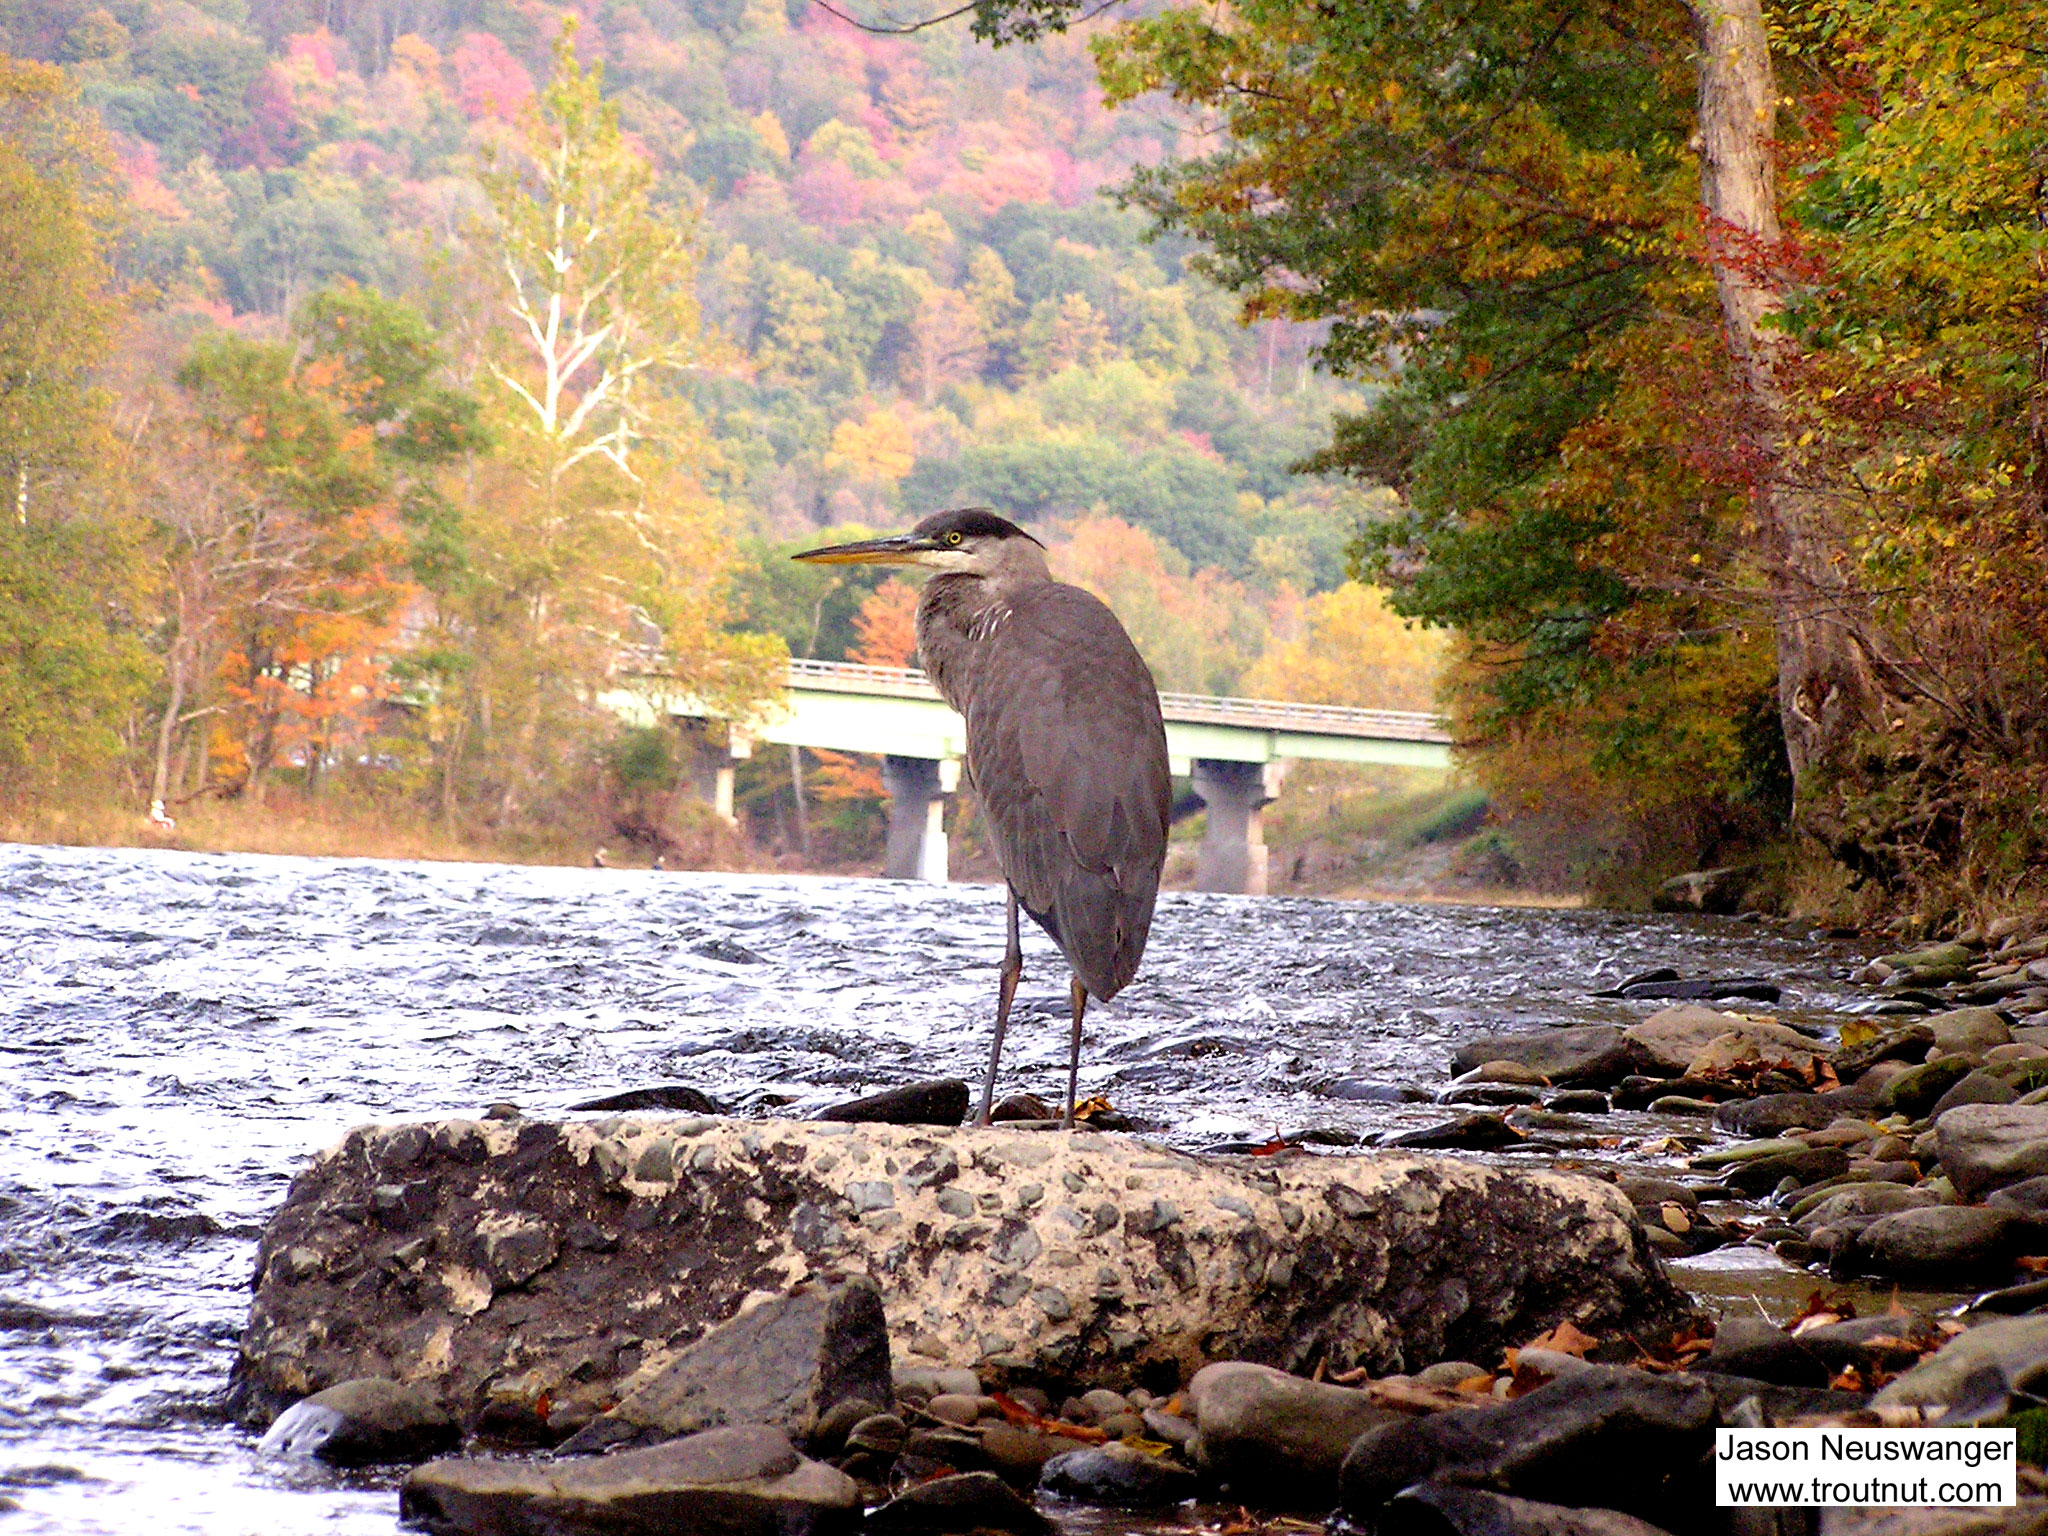 I'm breaking my rule about naming locations for this picture, since the context adds much to its meaning.  This great blue heron is standing on a slab of river-worn concrete silhouetted against the NY Quickway bridge over the Beaverkill River at Cairn's Pool.  Several human fishermen pursue trout from one shore while an avian fisherman pursues them from the other. From the Beaverkill River in New York.